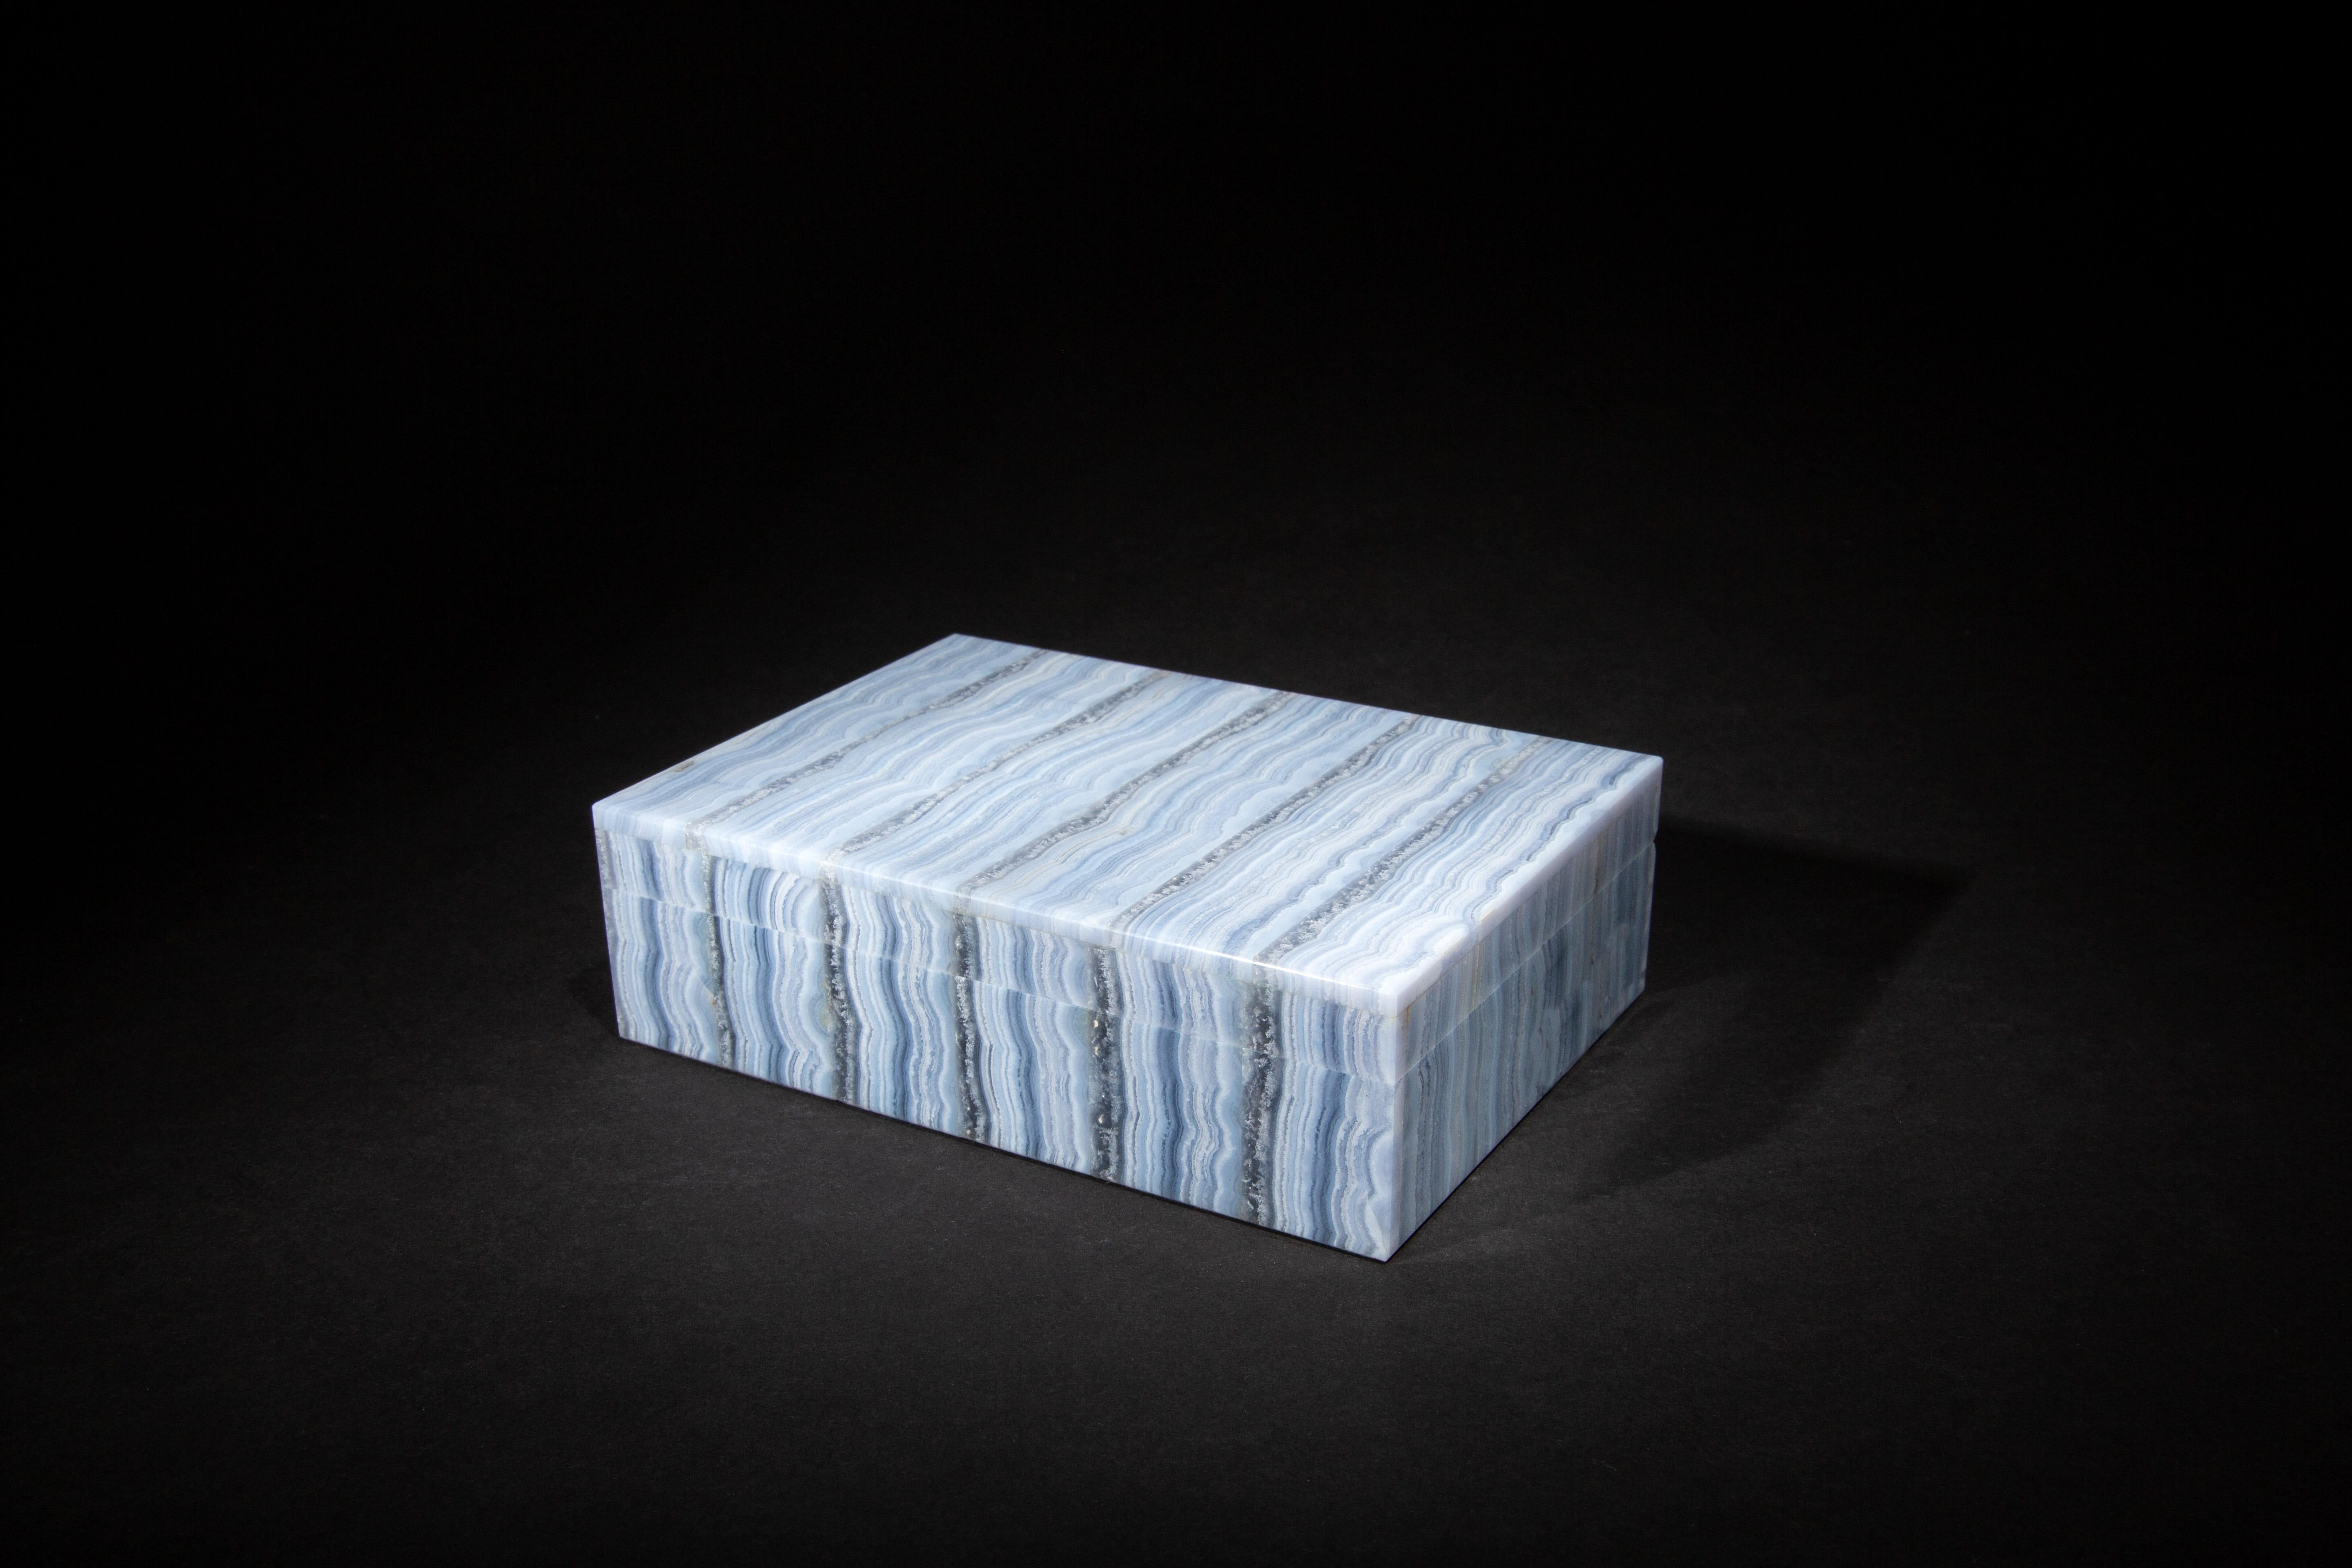 Blue Lace Agate Box:

Blue Lace Agate is a variety of chalcedony, which is a type of microcrystalline quartz. It is known for its delicate blue and white banded or lacy patterns, giving it a distinct and attractive appearance. The name “Blue Lace